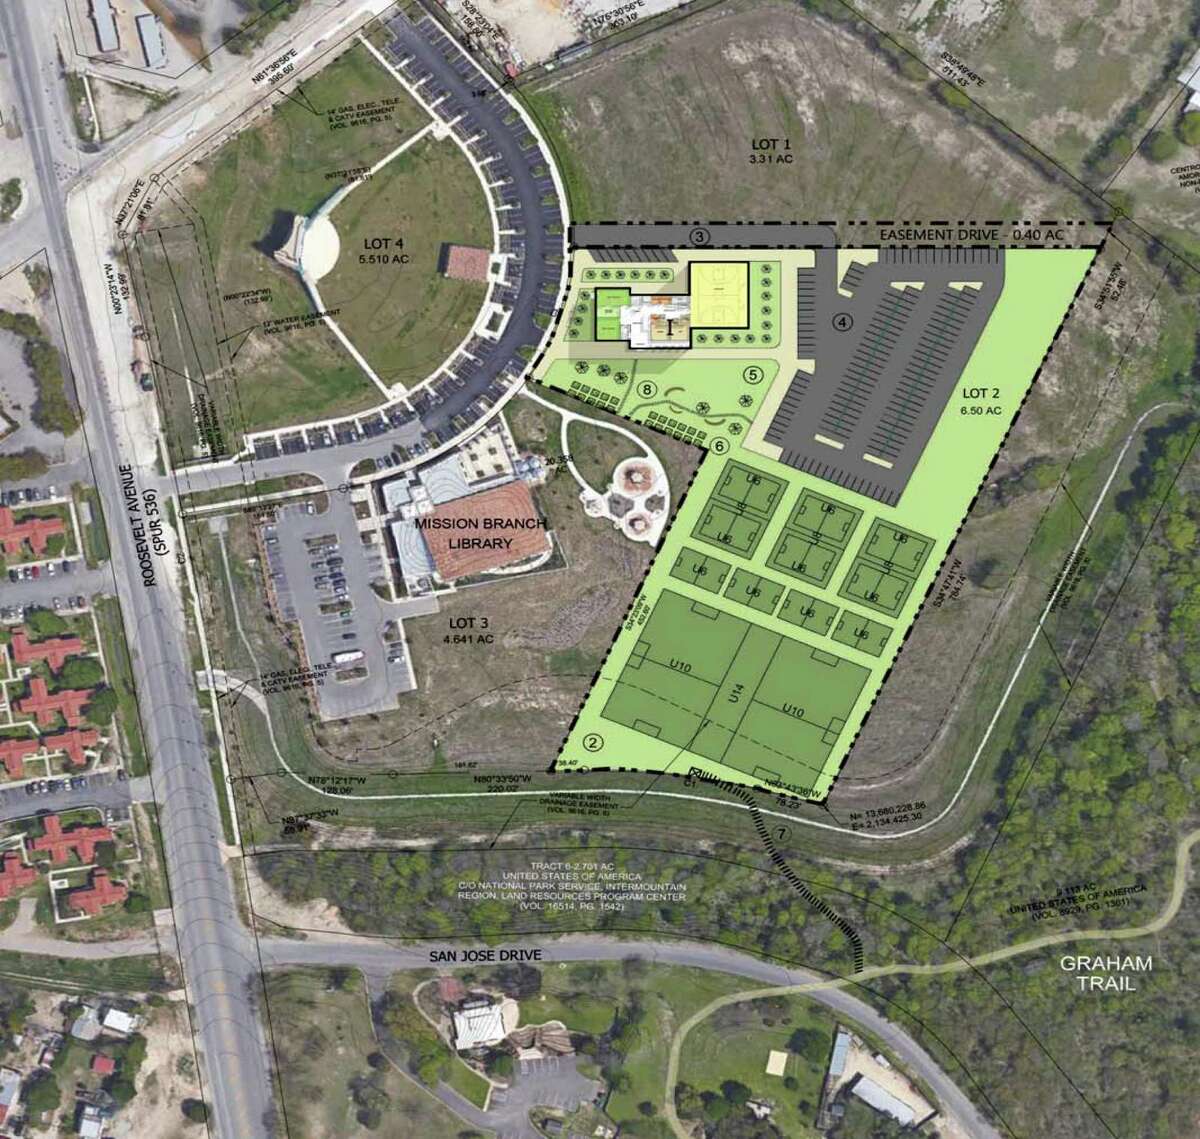 An aerial rendering shows the location of a proposed YMCA facility in the Mission Reach district near Mission San José.